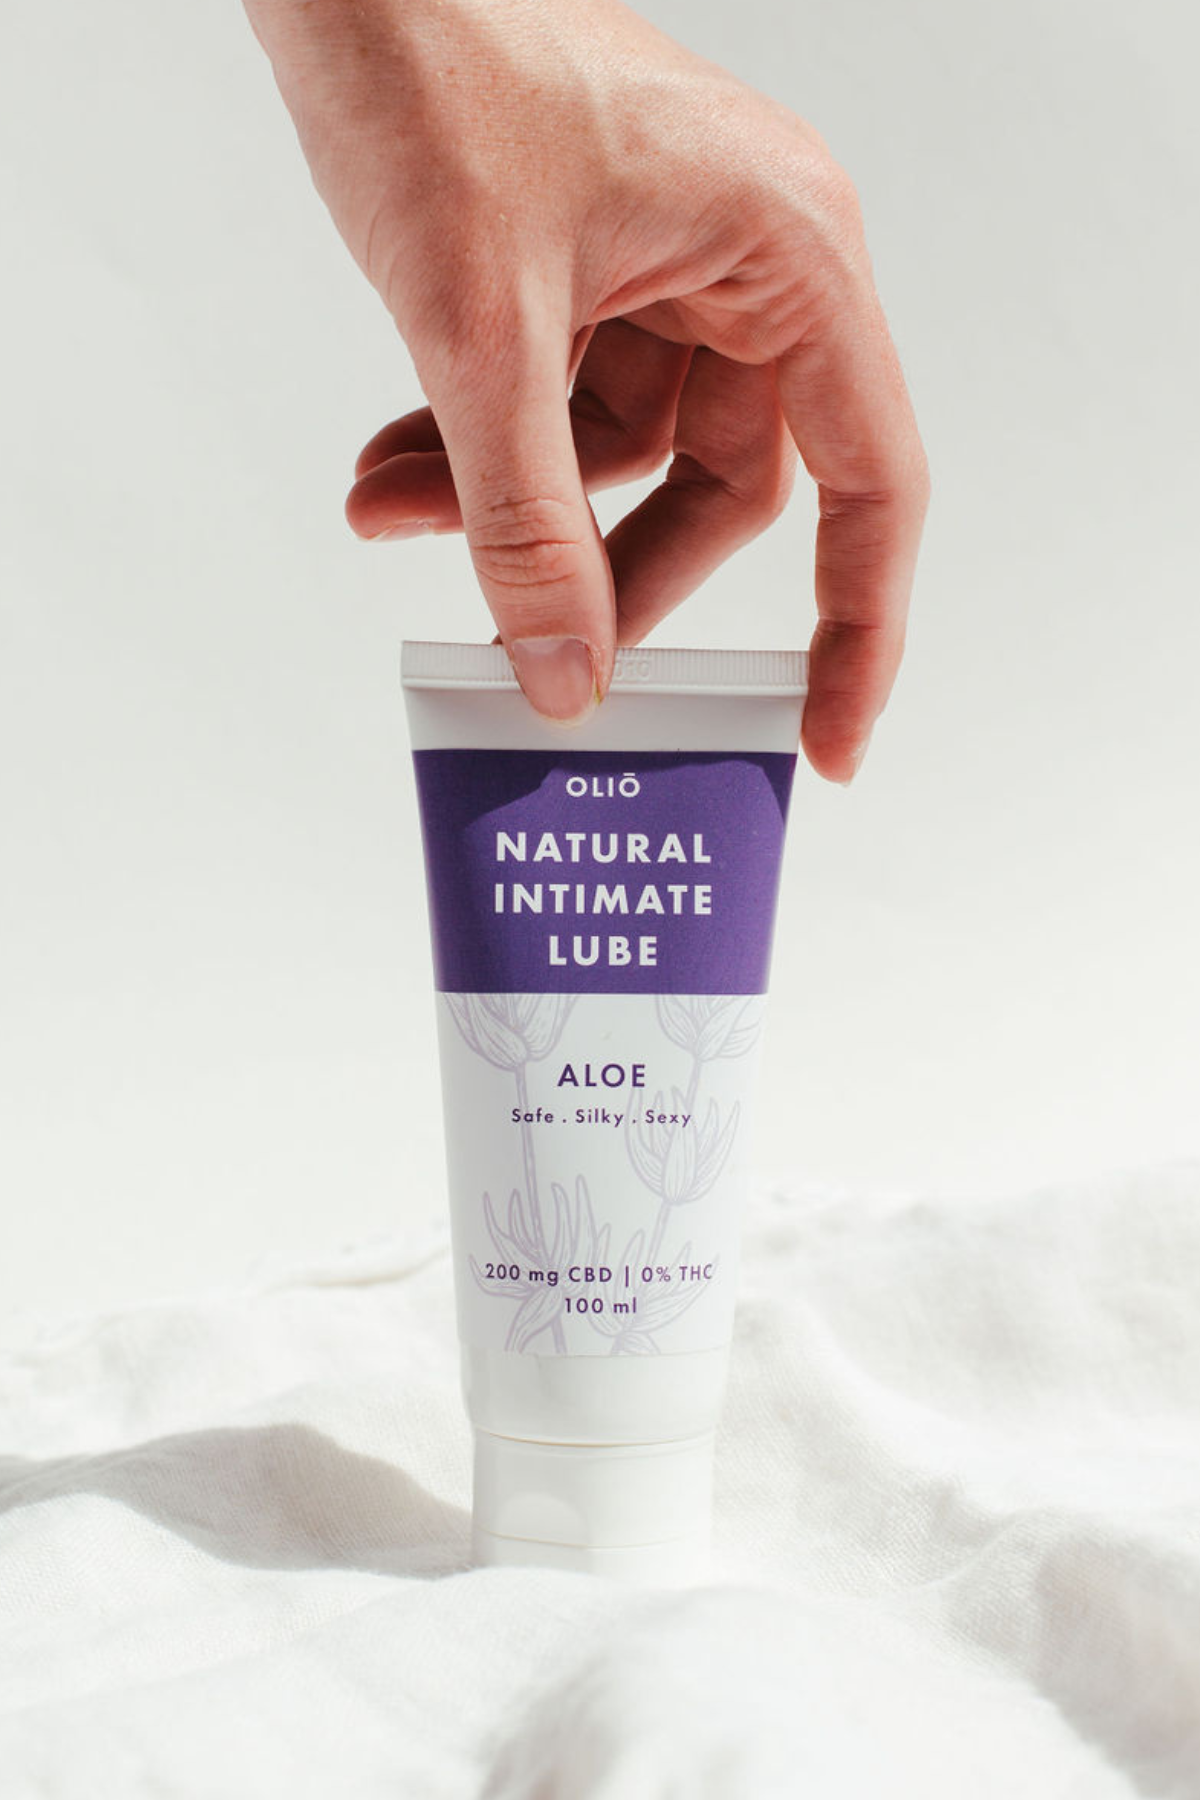 Olio's Natural Intimate Lube Size